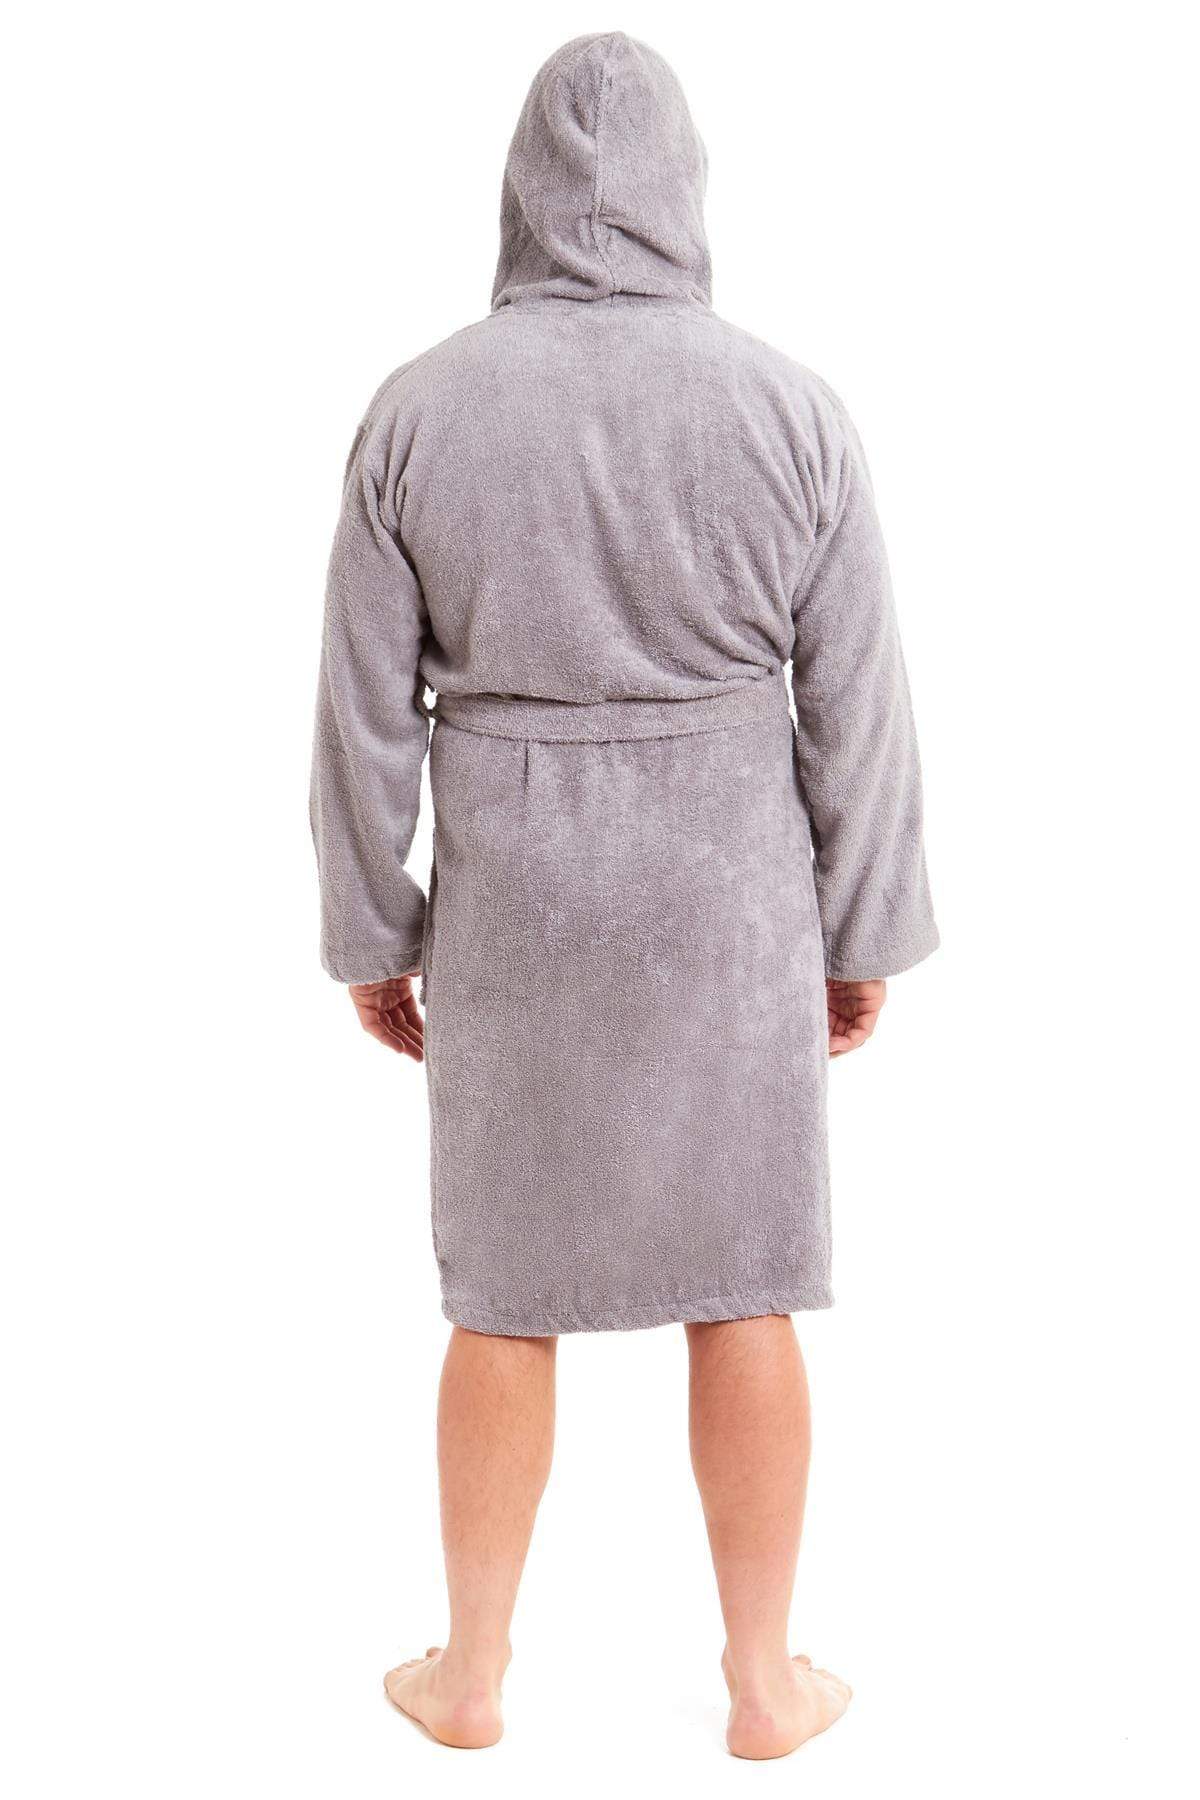 Men's Luxury Robes And Pajamas | Baturina Homewear | Mens dressing gown,  Gowns dresses, Silk dressing gown